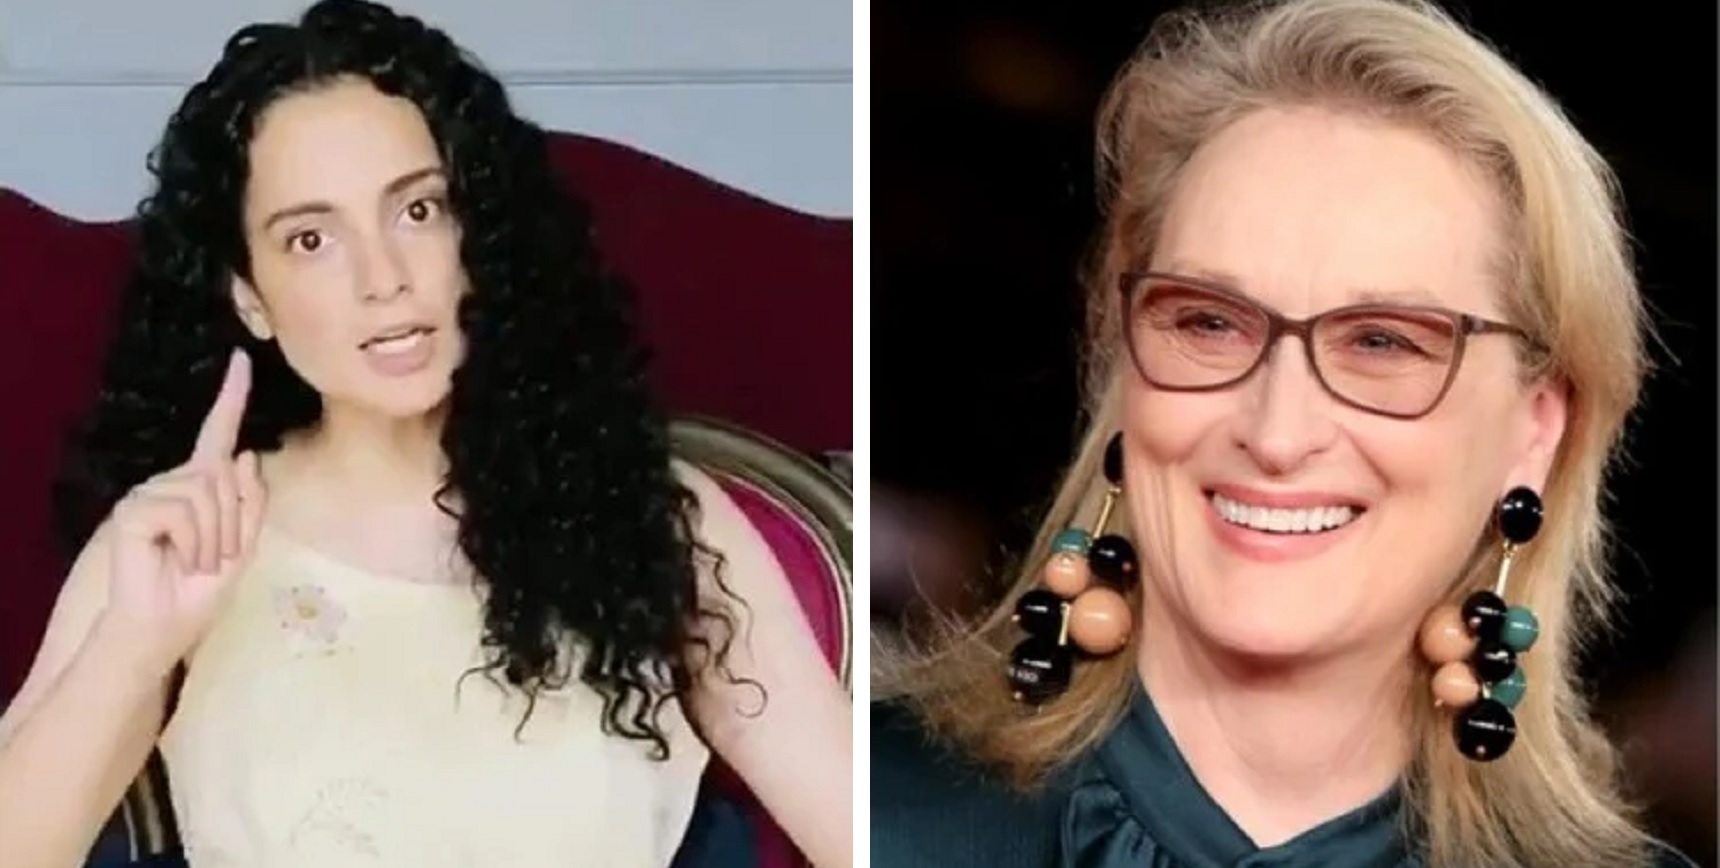 Internet Reminds Kangana Ranaut How ‘Humble’ Meryl Streep is Despite Being a ‘Hollywood Great’